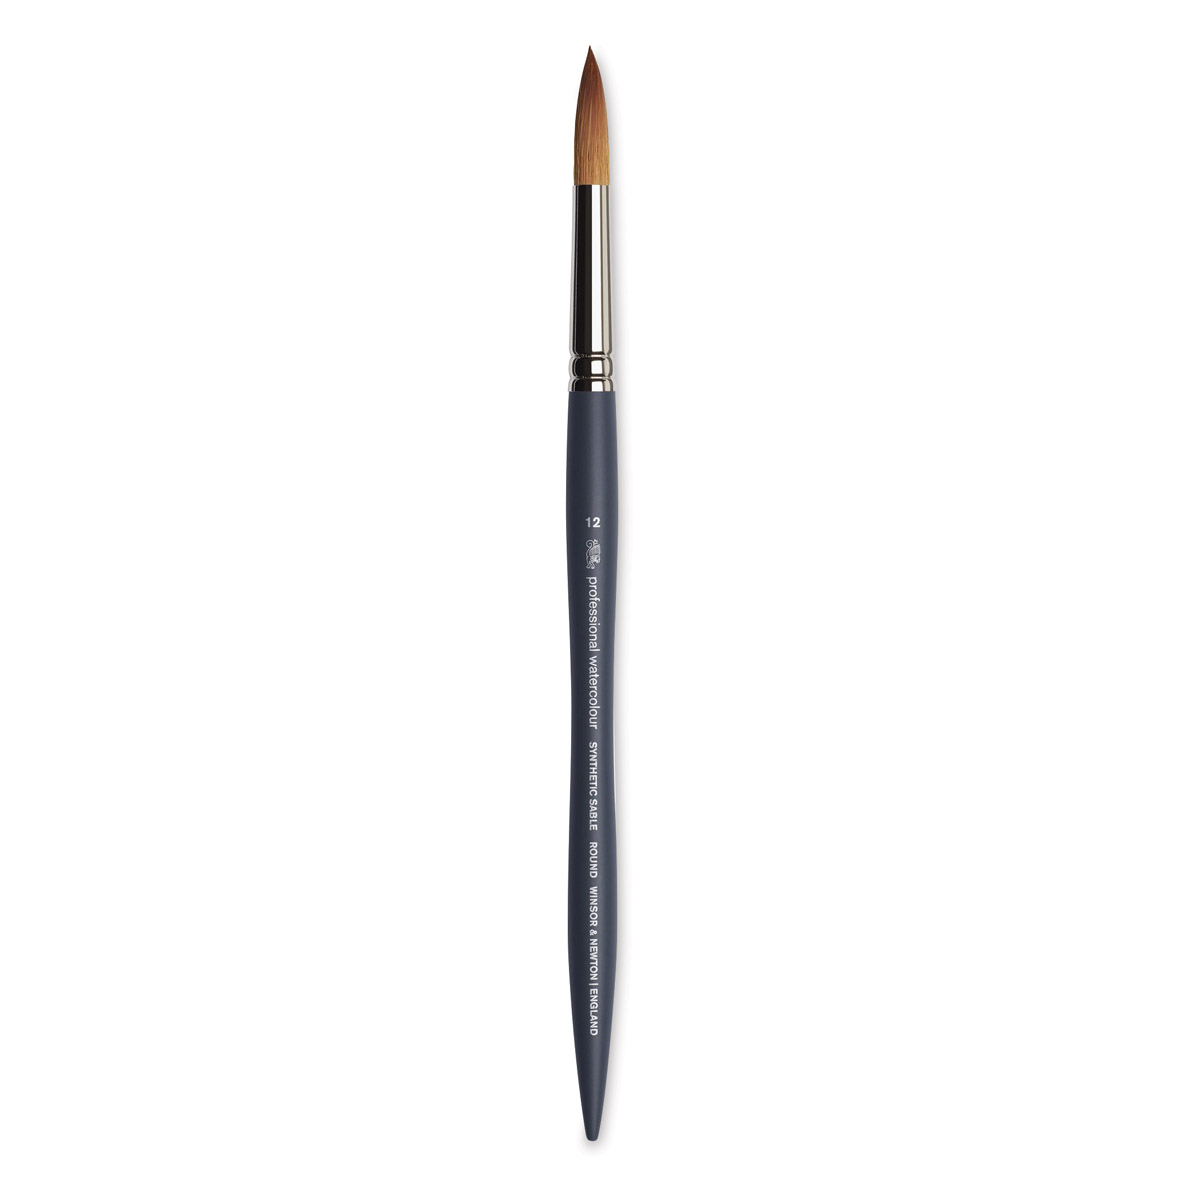 Winsor & Newton : Professional Watercolour : Synthetic Sable Brush : Round  : Size 00 - W&N : Synthetic Brushes - W&N : Brushes - Winsor & Newton -  Brands